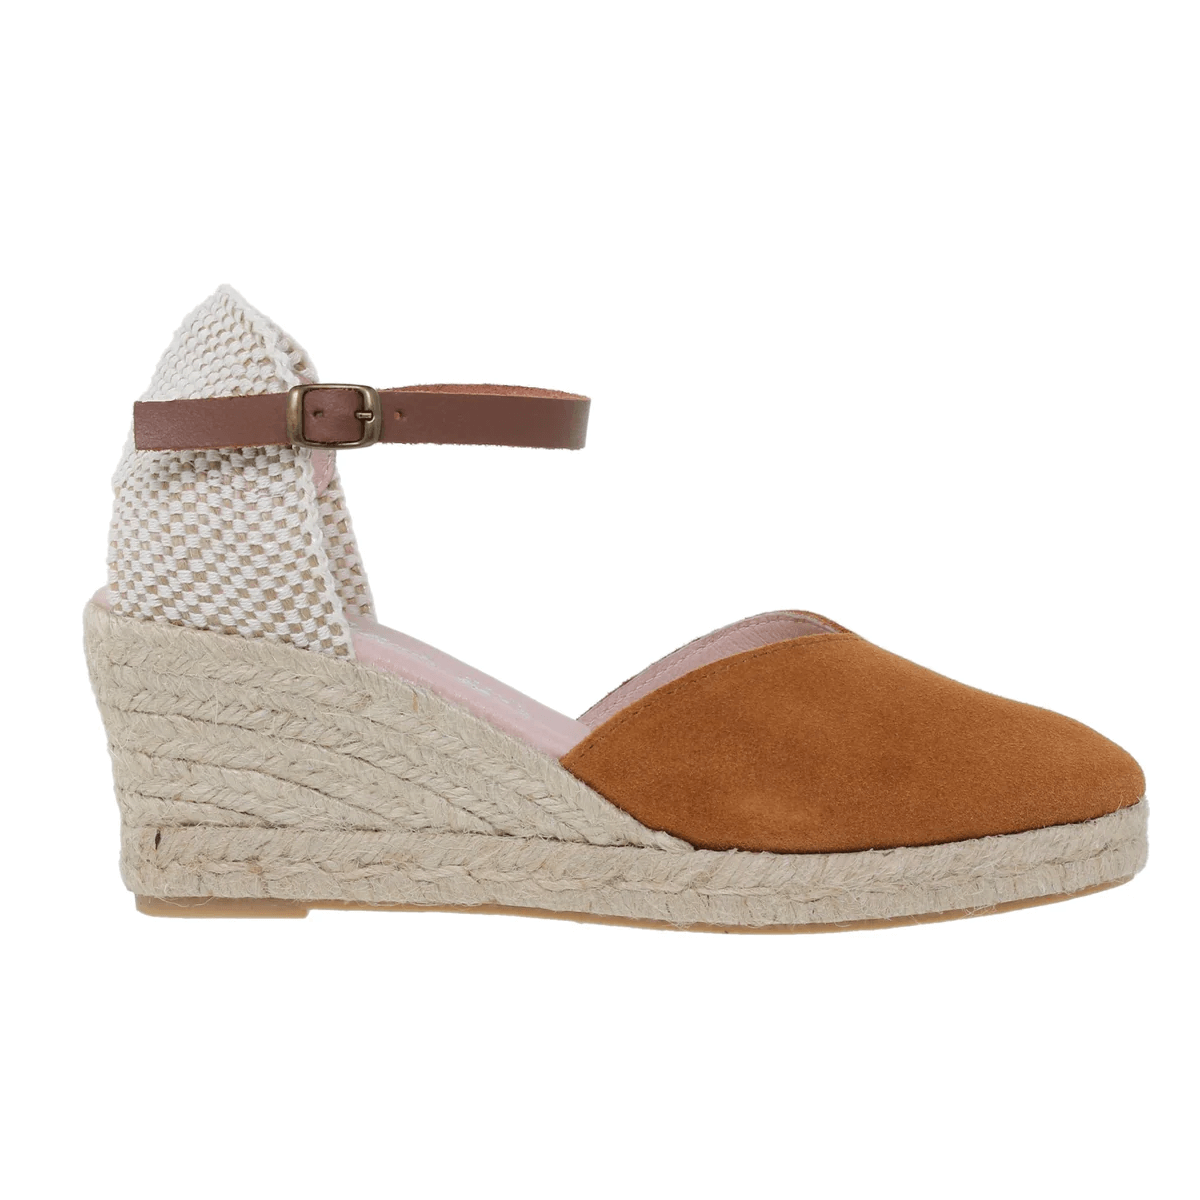 Brown leather espadrilles by Amelie